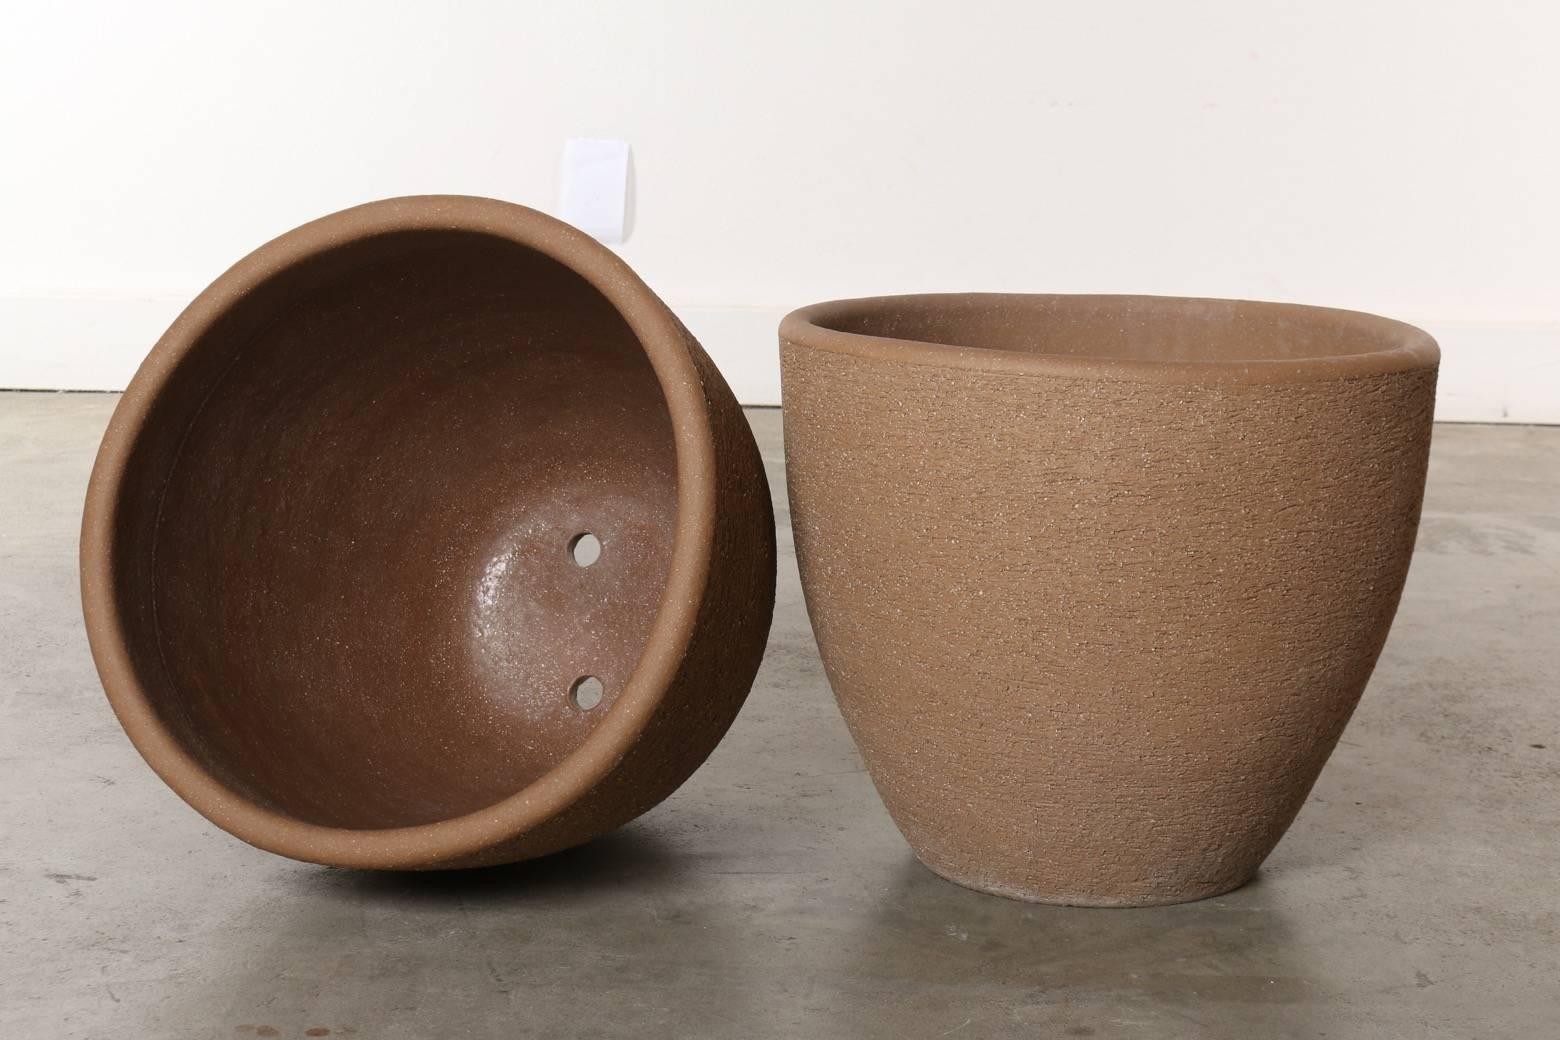 These original large scale Stan Bitters ceramic scrape pots have a presence that embodies the California landscape and an essence that artfully complements the plants they hold. Hand-built and organic, these pots conjure up images of the master